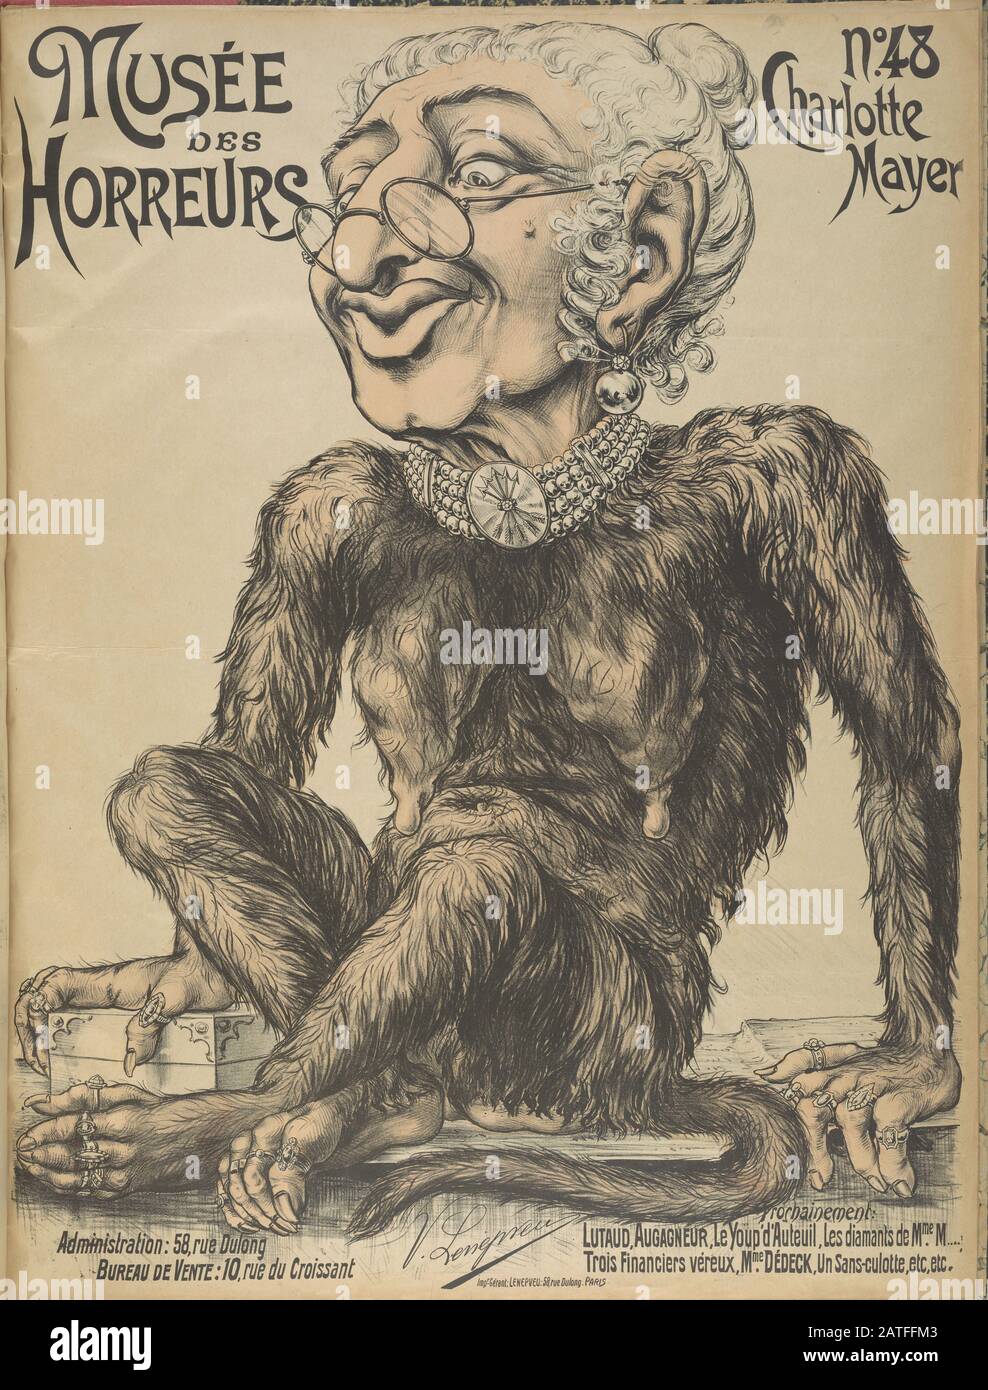 Musée des Horreurs -  No. 48 Charlotte Mayer  -  1900  -  Lenepveu, V.  -  Caricature of Charlotte de Rothschild (1825-1899) as an old monkey wearing jewelry. Charlotte was a member of the prominent Rothschild family of Jewish financiers that became easy targets for anti-semitic outrage during the Dreyfus Affair even though they had little or no direct involvement. Hand colored. Stock Photo